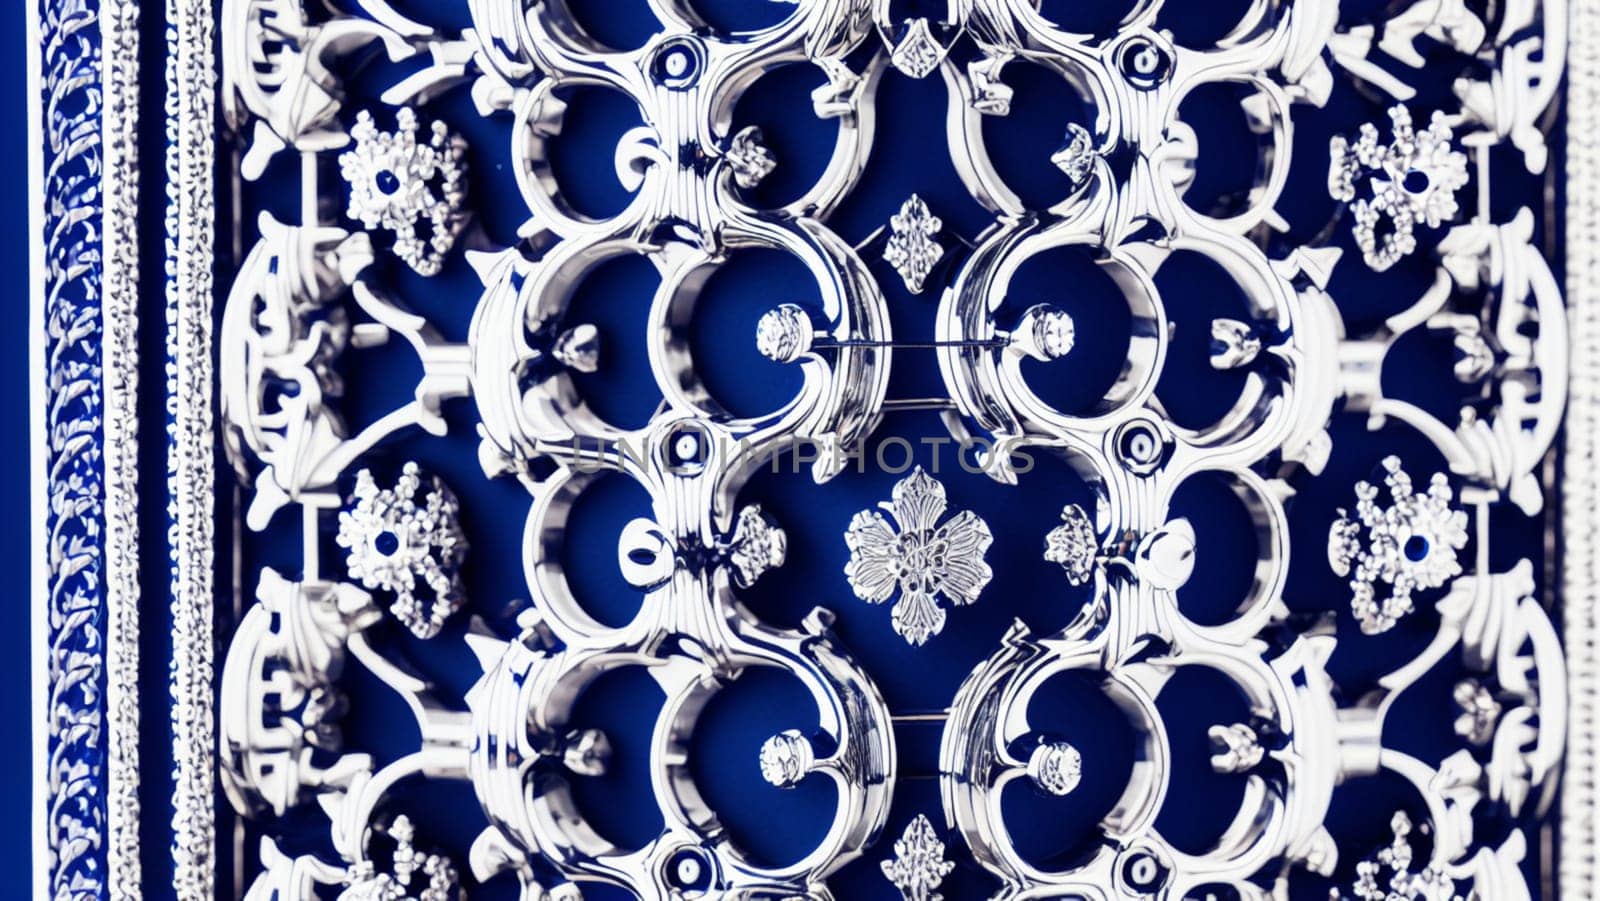 Beautiful metallic silver background with reflections and glitters and navy blue background with a luxurious decorative look with ornaments. by XabiDonostia